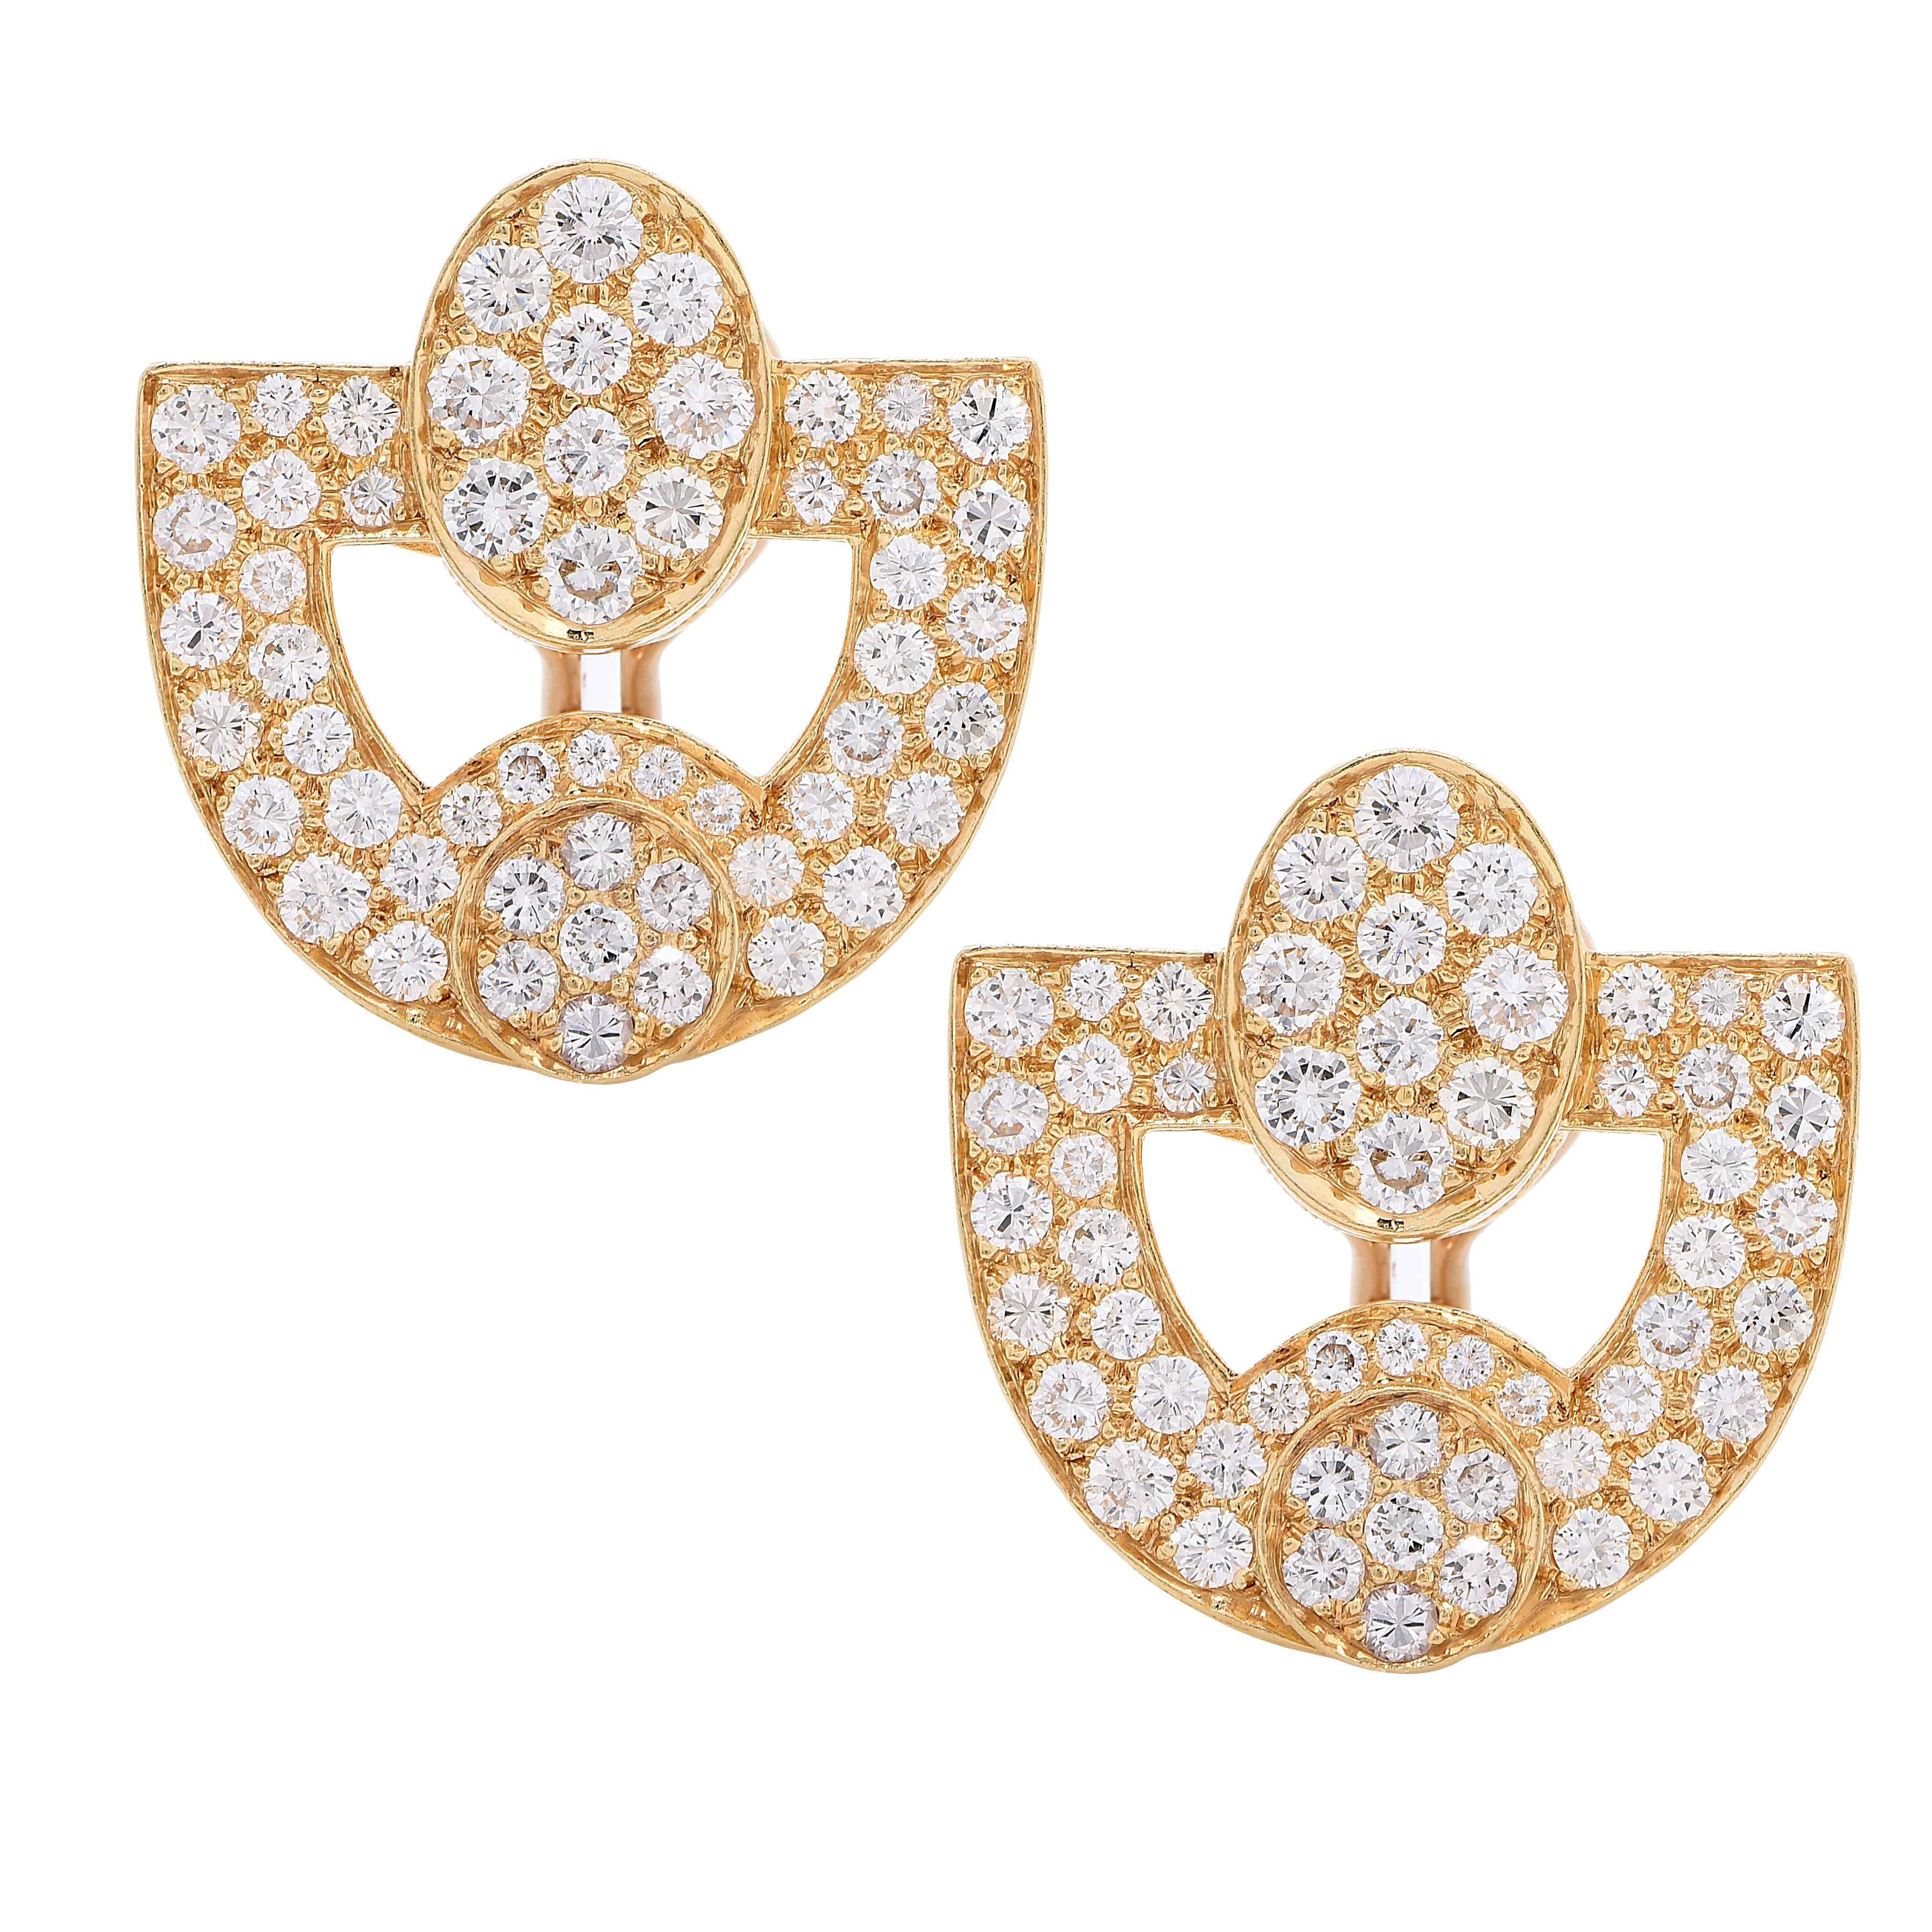 4 Carats Diamonds Yellow Gold Earrings In Excellent Condition For Sale In Bay Harbor Islands, FL